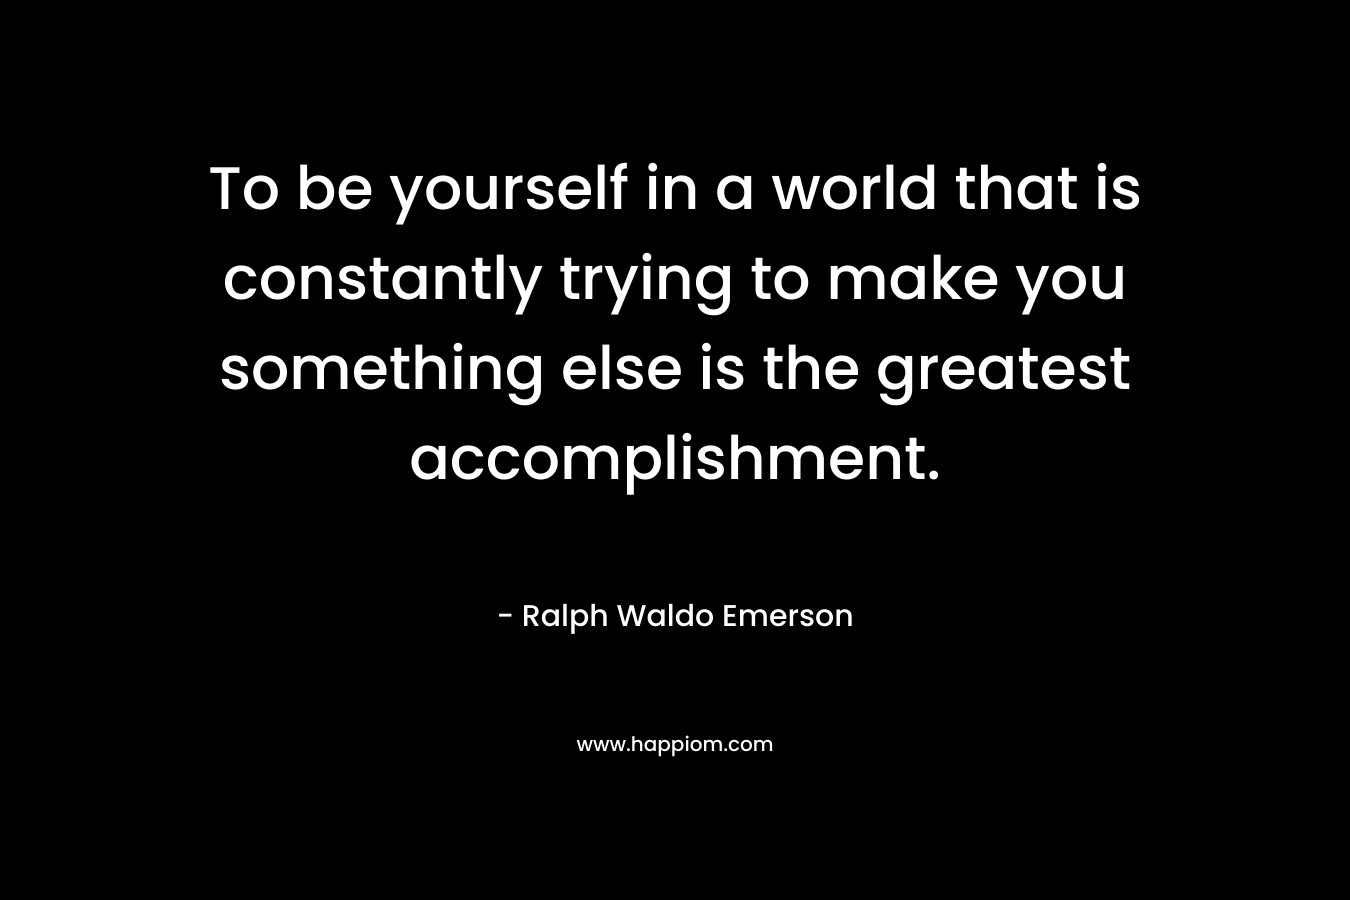 To be yourself in a world that is constantly trying to make you something else is the greatest accomplishment. – Ralph Waldo Emerson